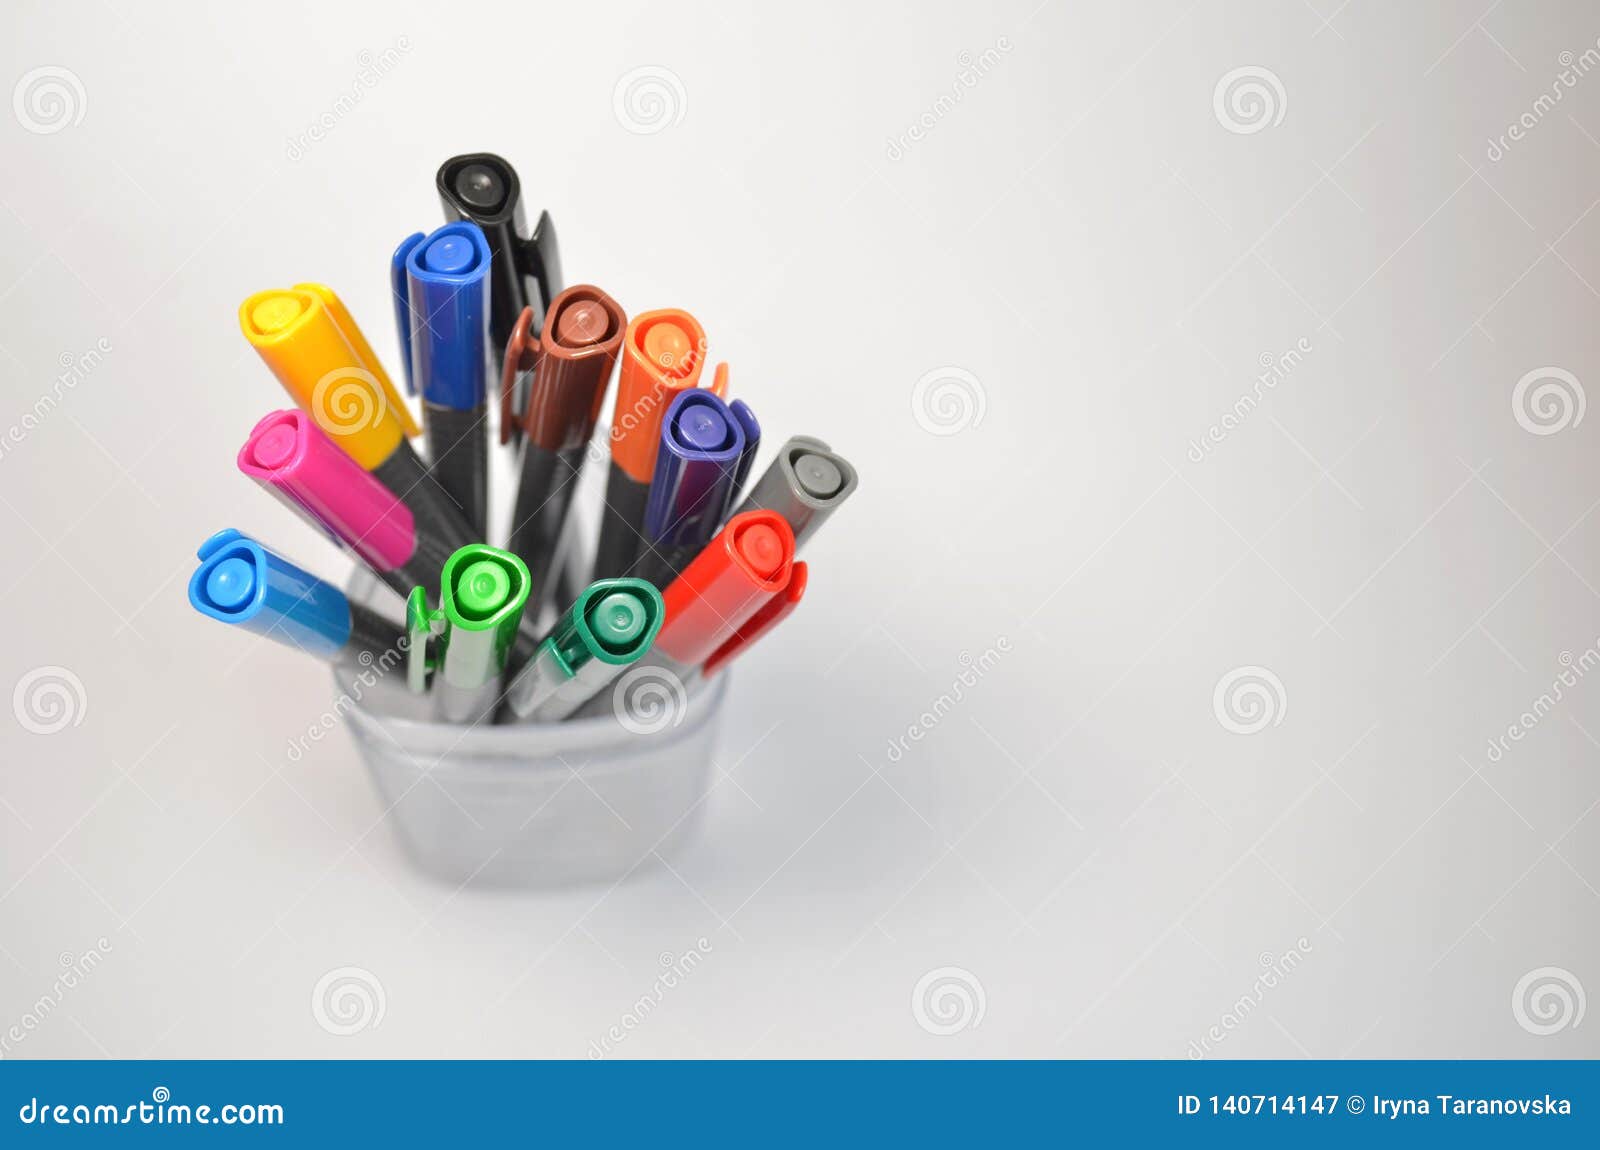 Set of Multi-colored Pens Standing in a Transparent Glass, Top View on Gray  Background, Horysontally with Copyspace Stock Image - Image of supplies,  creative: 140714147